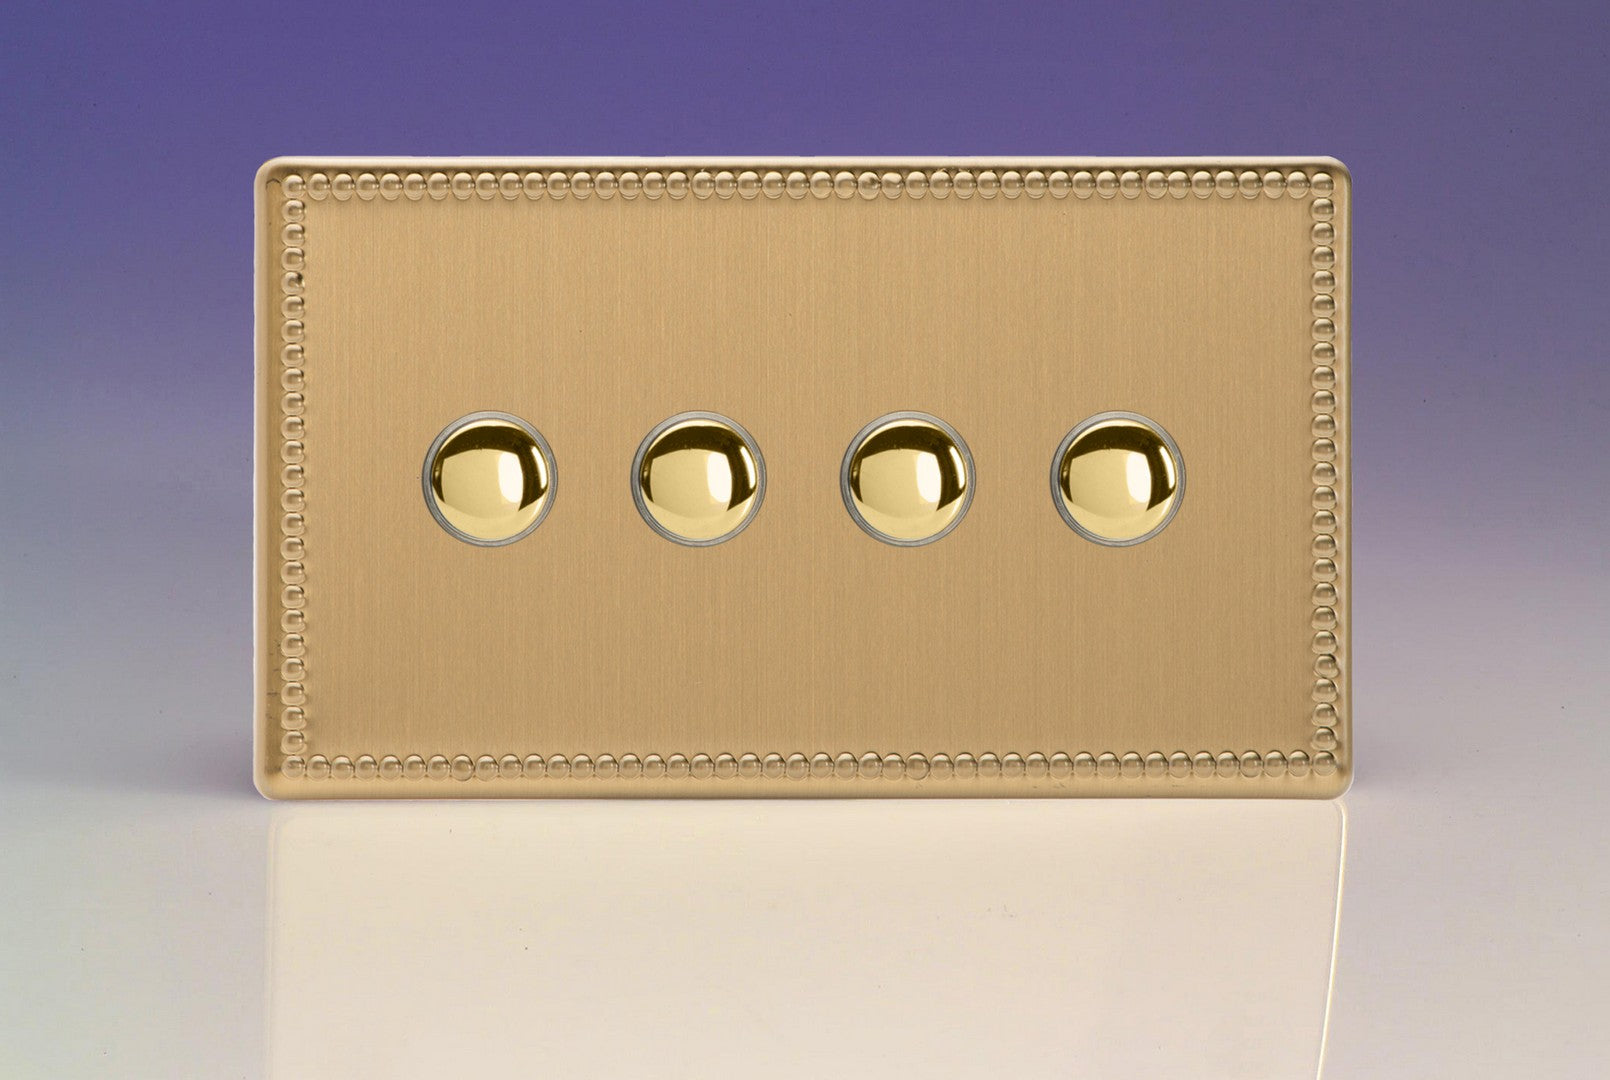 Varilight IJDYS004S.JB Jubilee Brushed Brass 4-Gang Tactile Touch Control Dimming Slave for use with Master on 2-Way Circuits (Twin Plate)